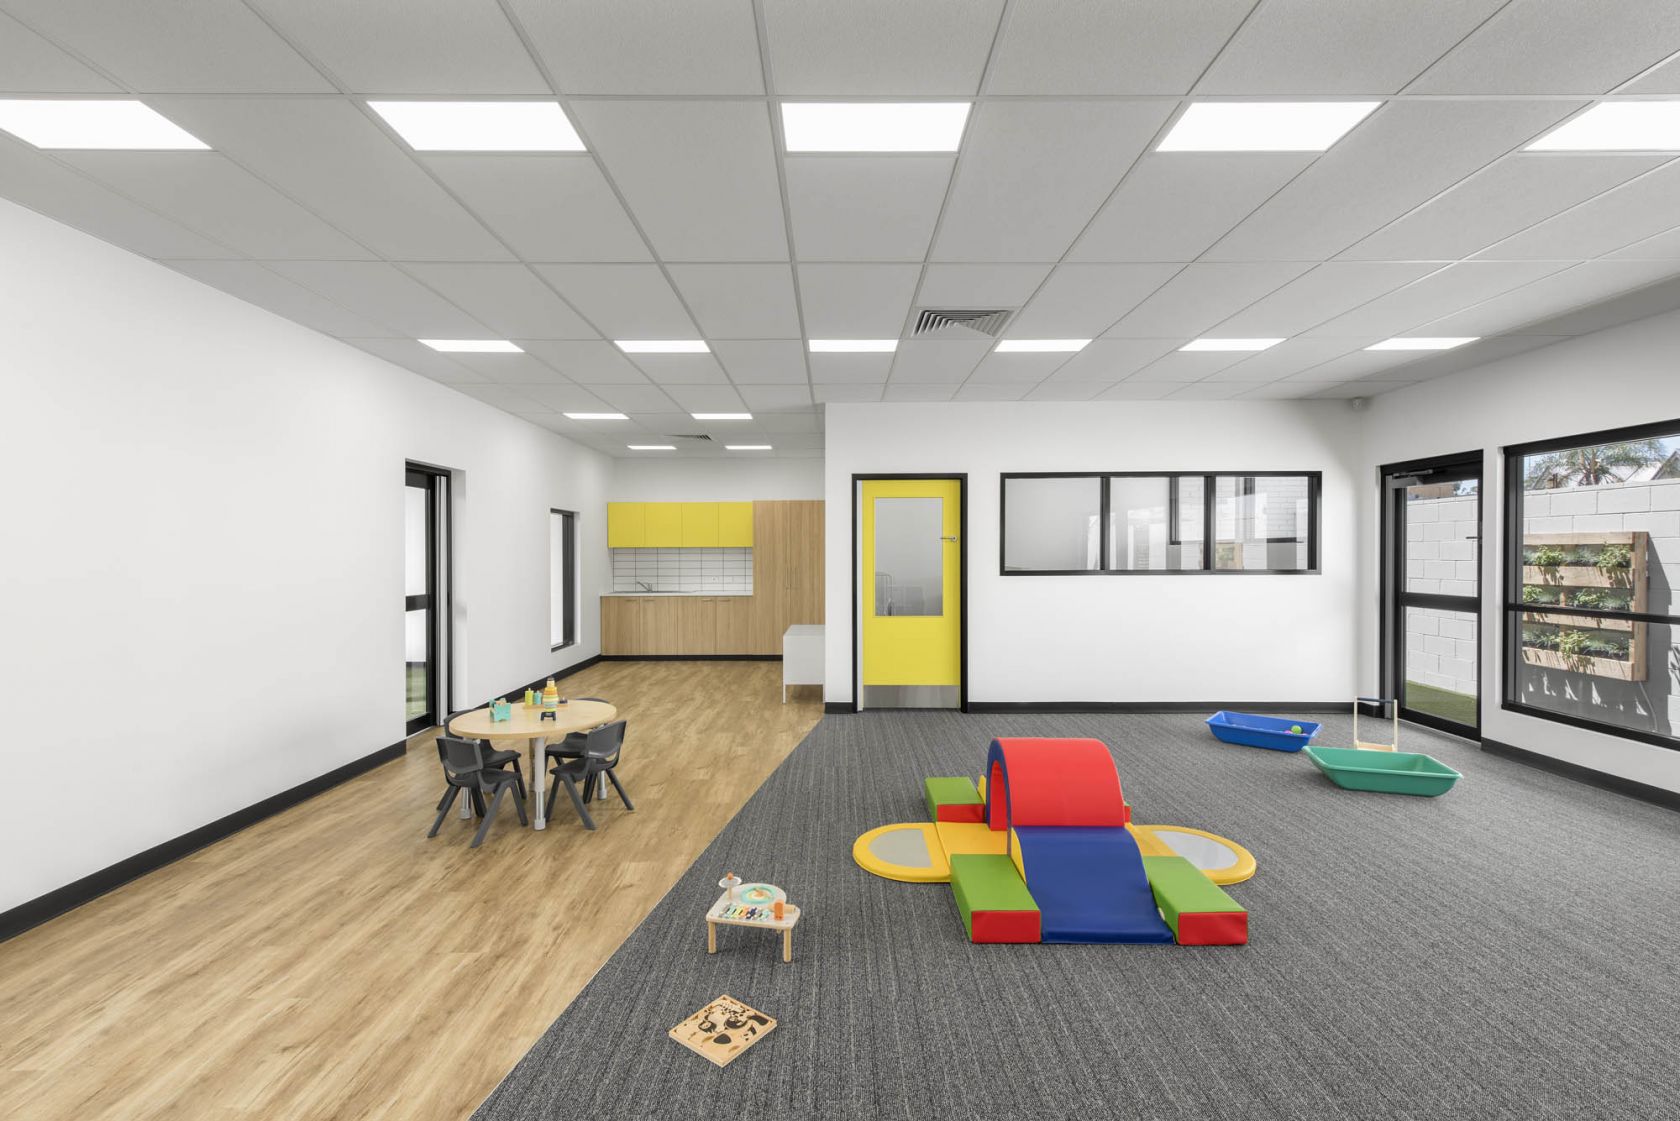 Treetops early learning centre kindergarten fitout adelaide construction education play room timber flooring carpet colours